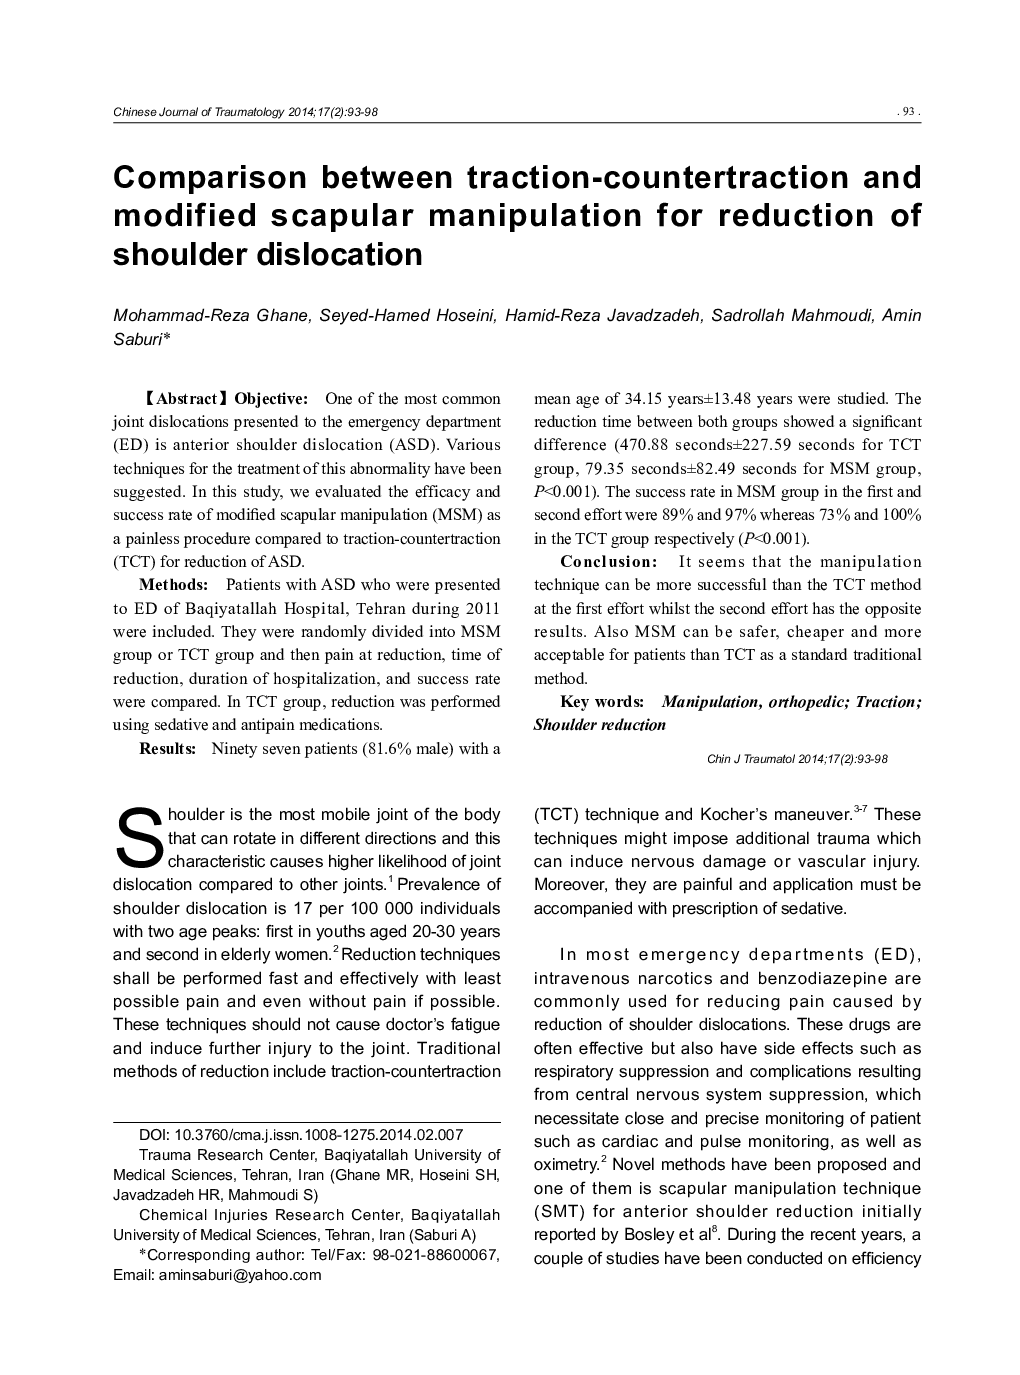 Comparison between traction-countertraction and modified scapular manipulation for reduction of shoulder dislocation